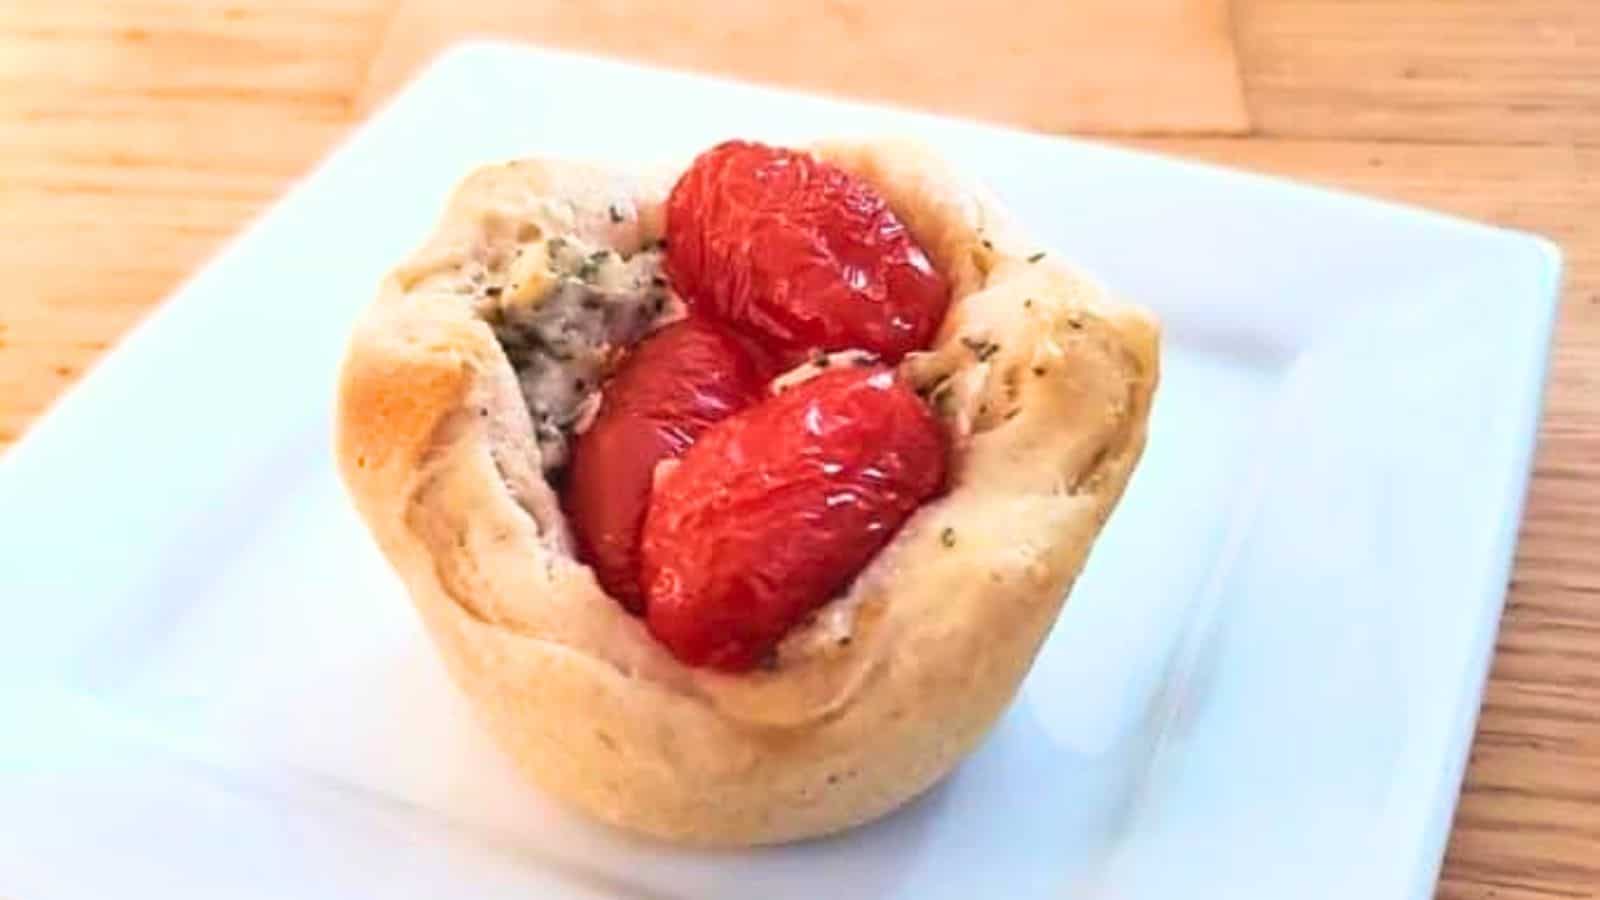 Image shows a Tomato Basil Biscuit Cup on a white plate.